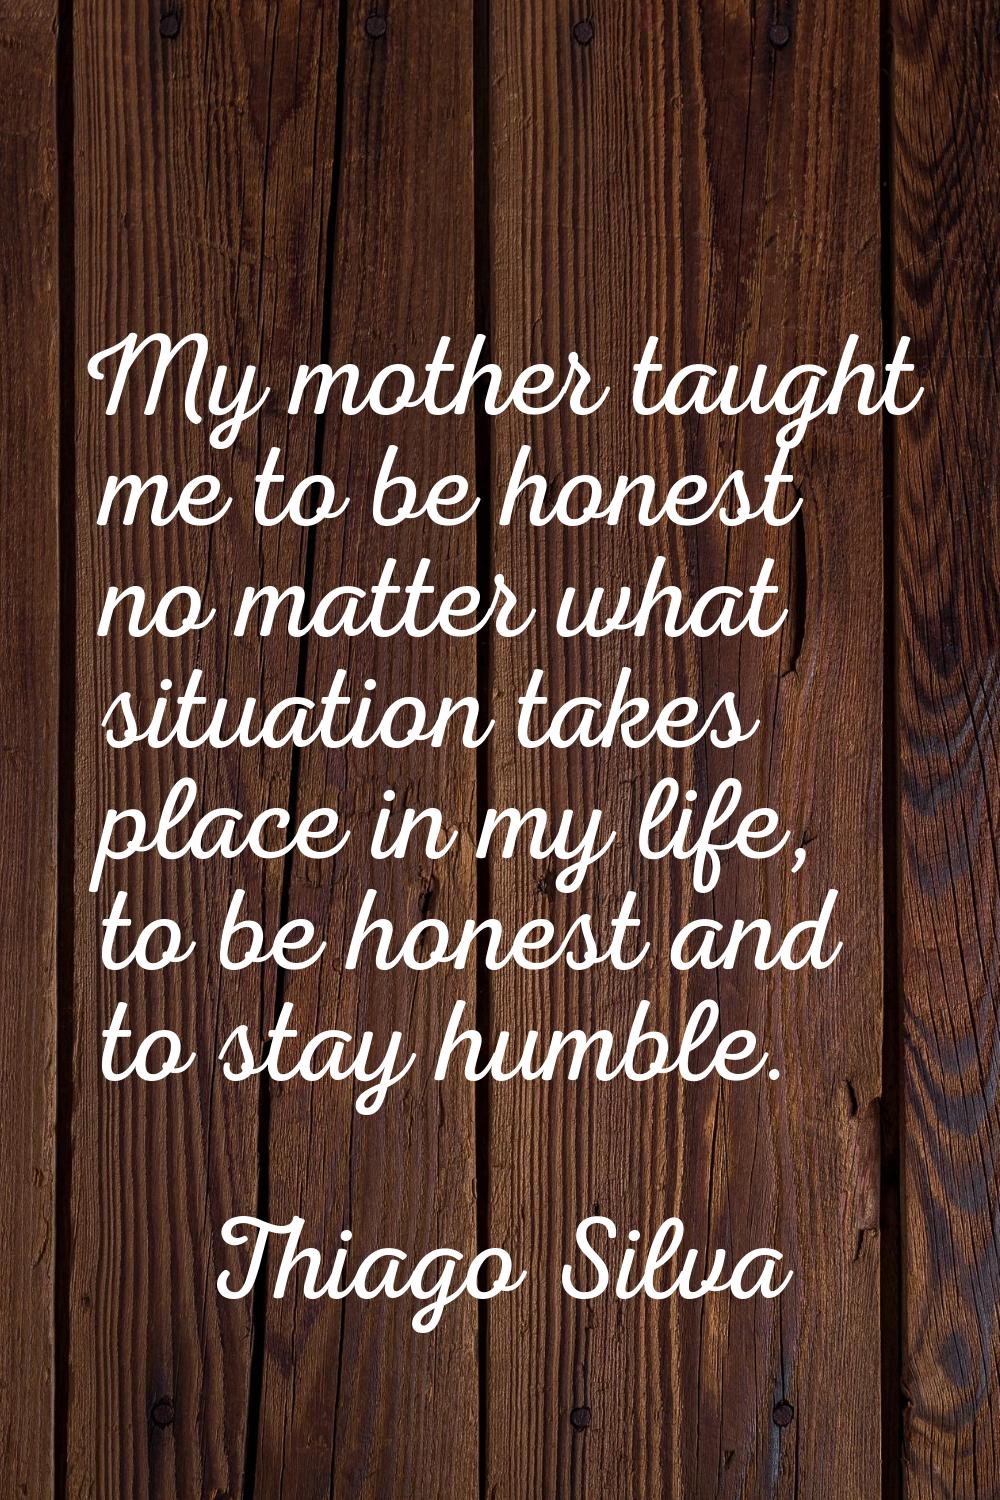 My mother taught me to be honest no matter what situation takes place in my life, to be honest and 